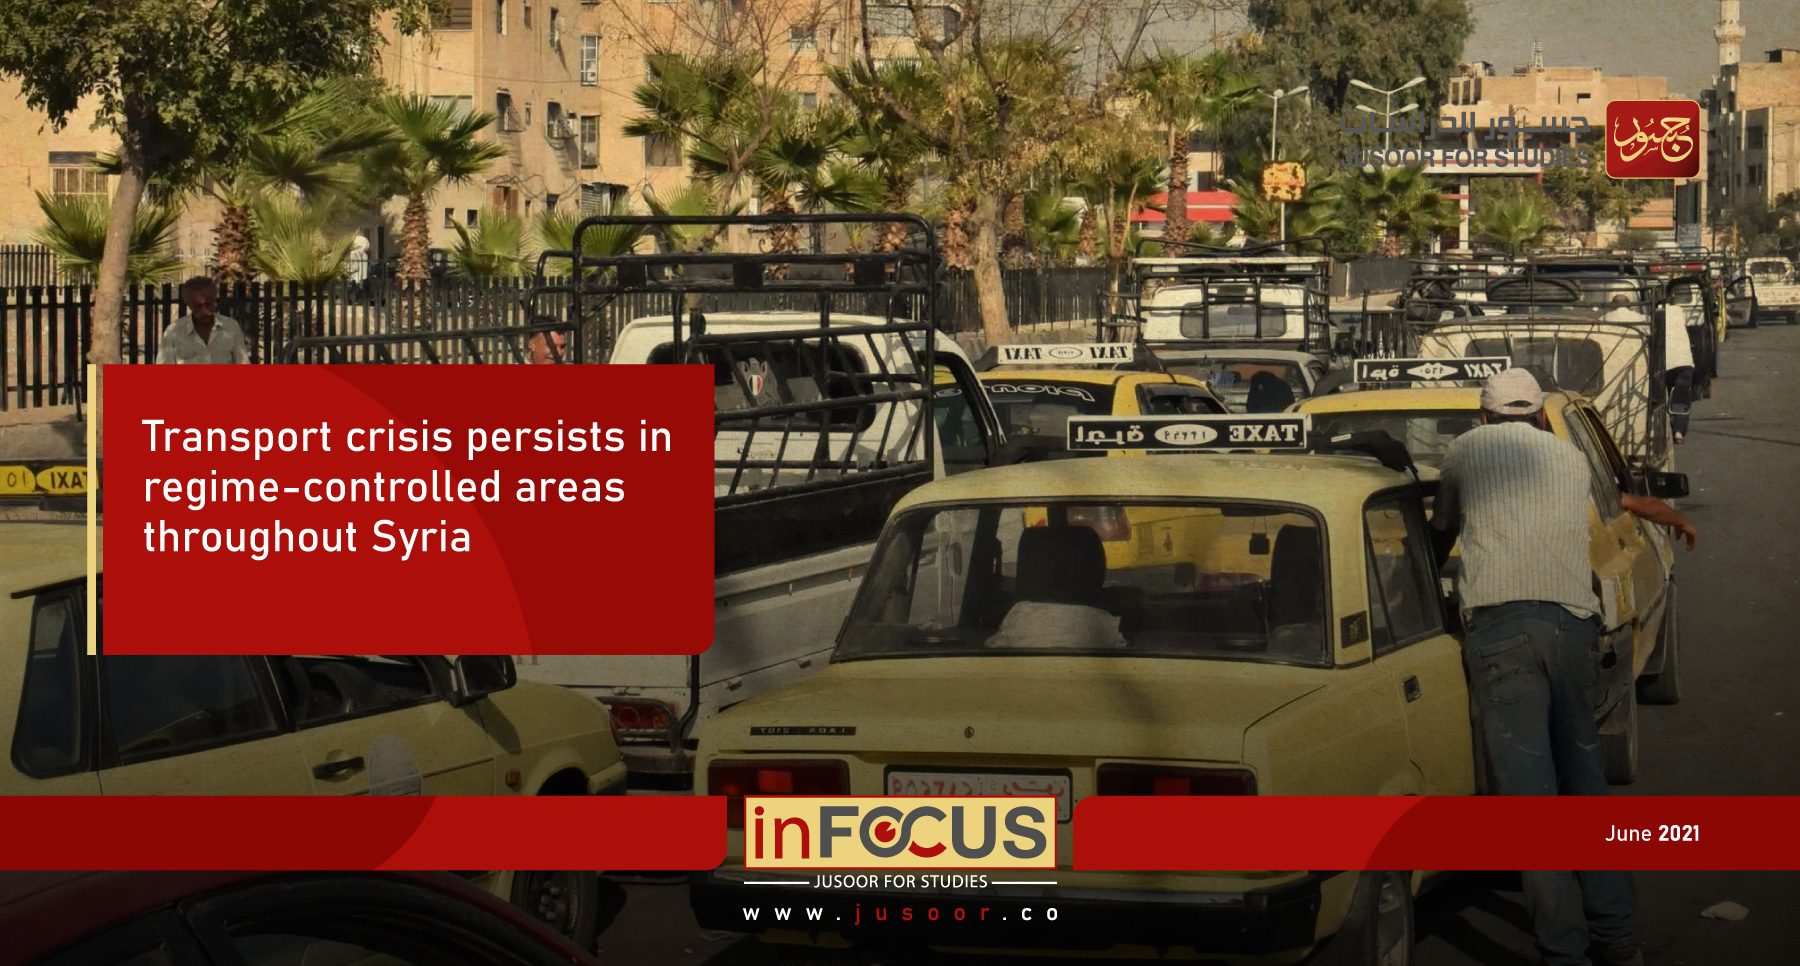 Transport crisis persists in regime-controlled areas throughout Syria